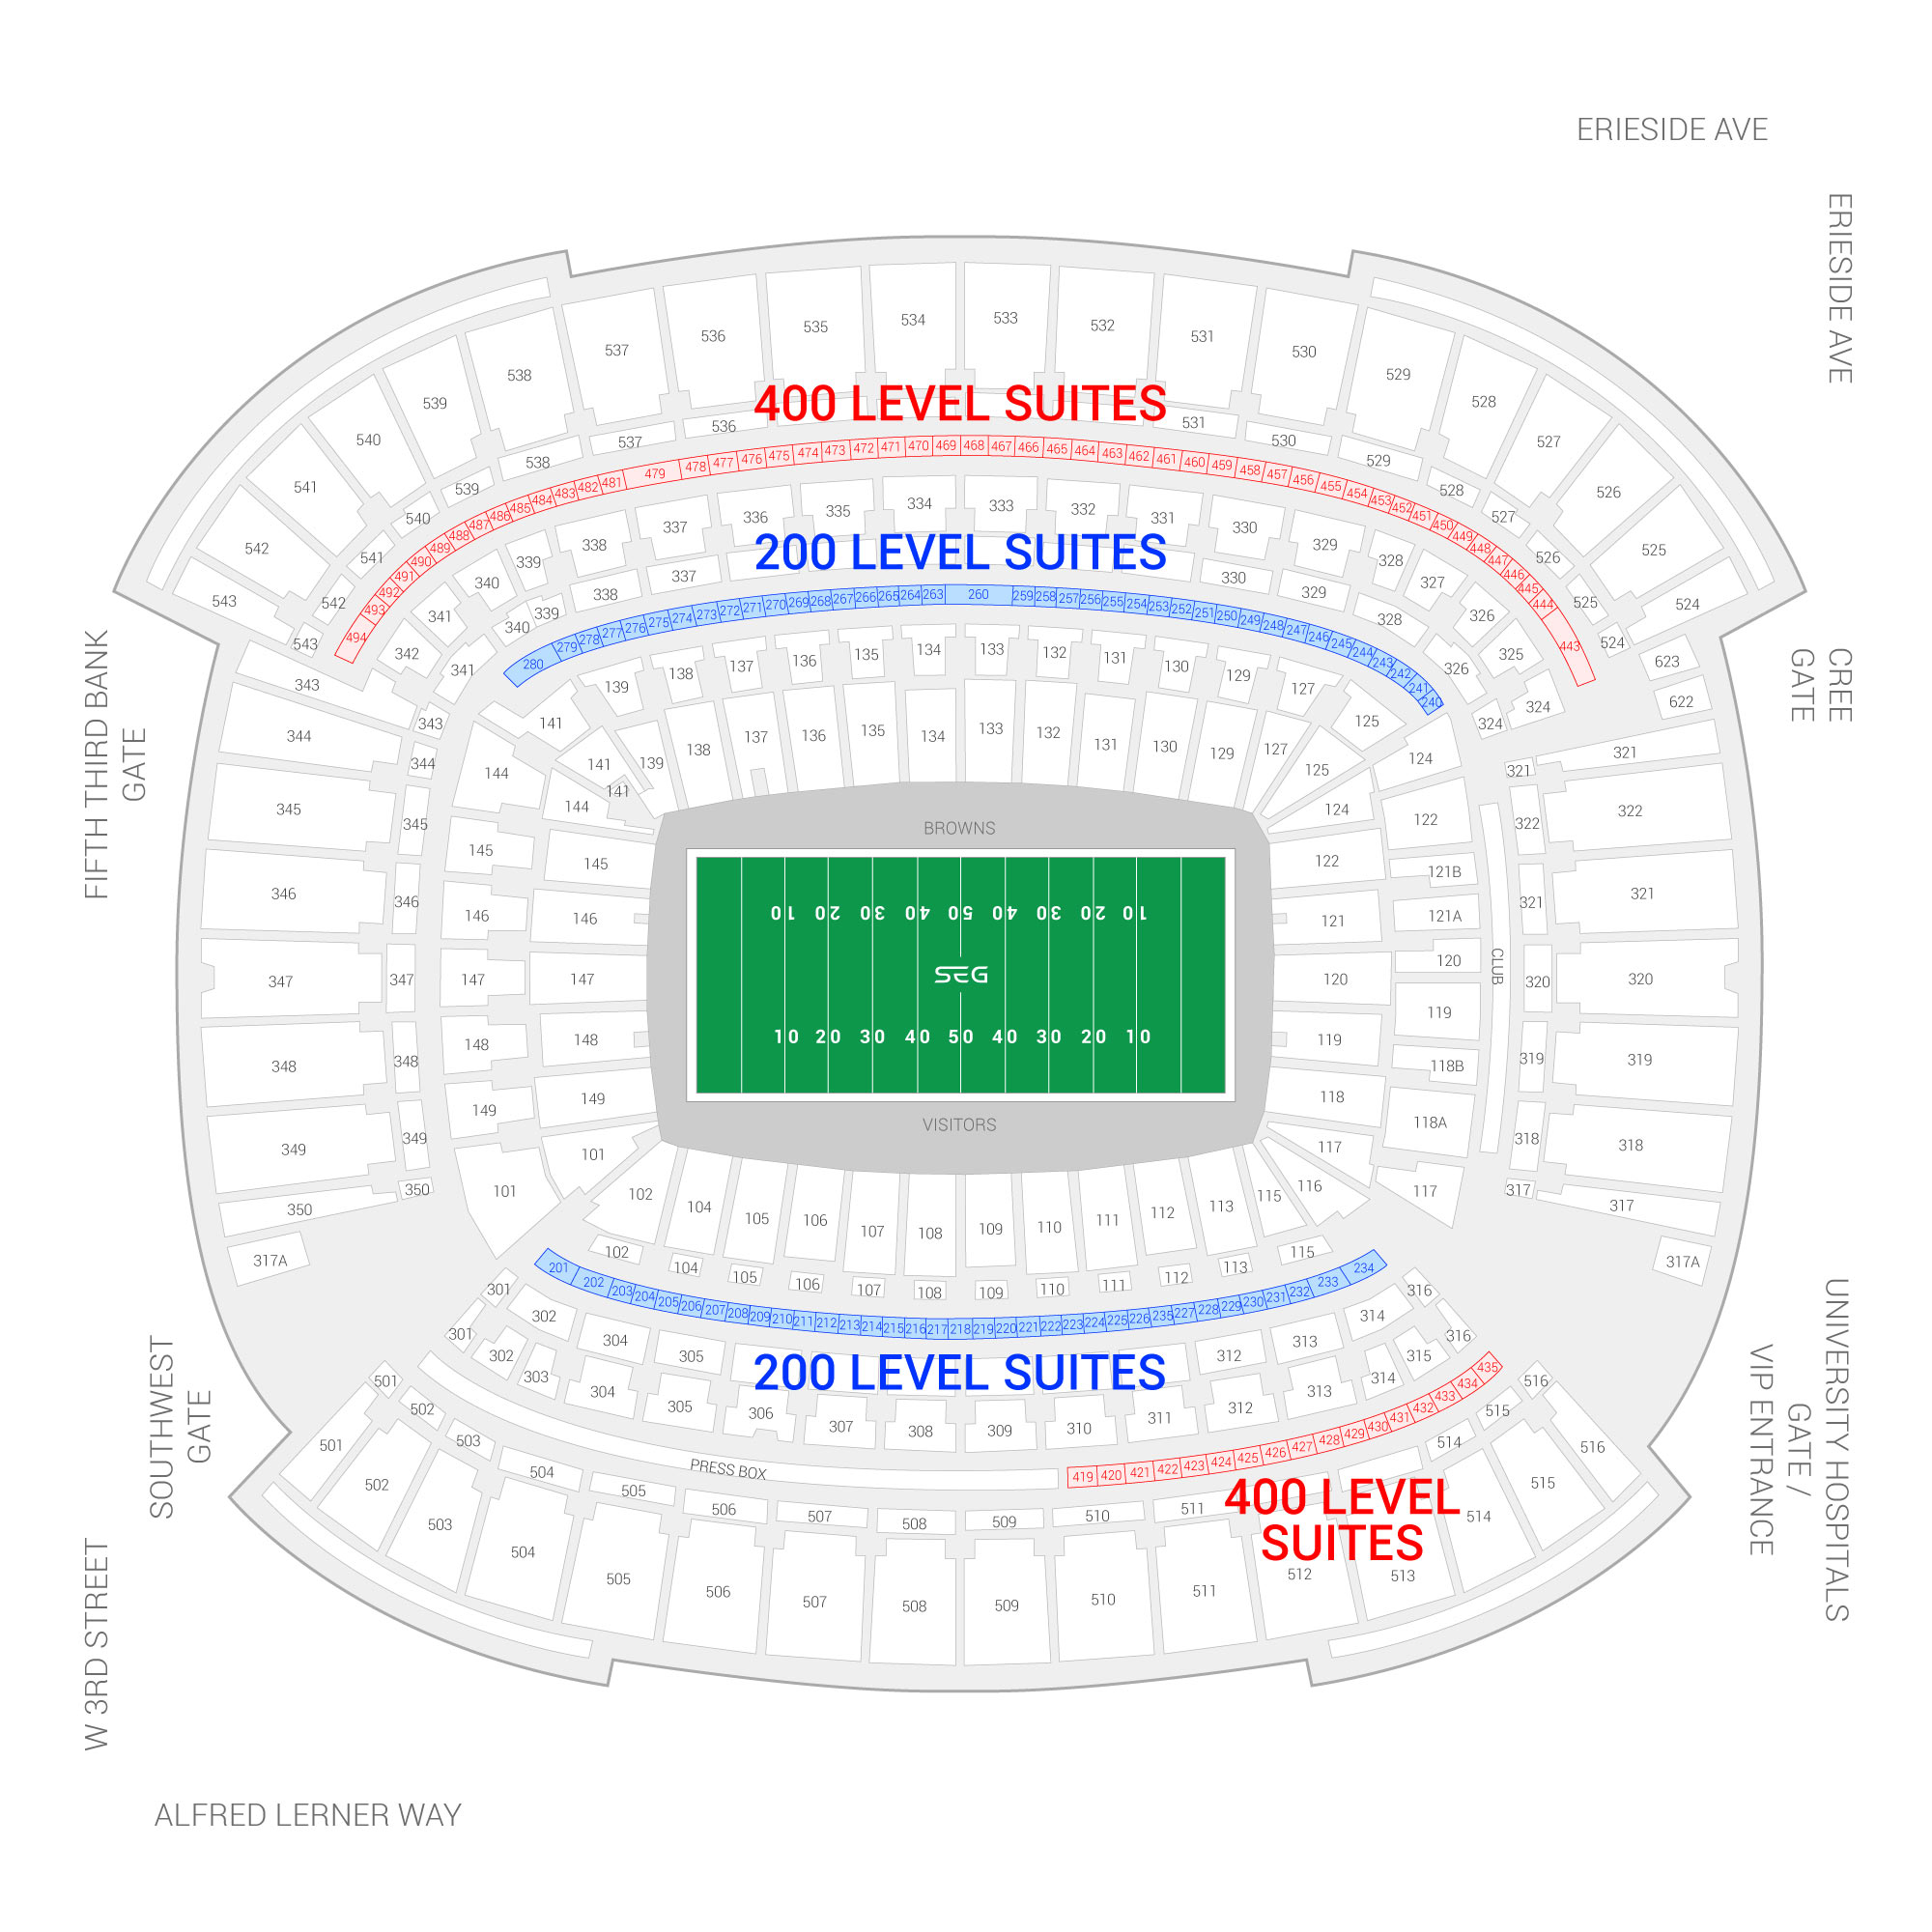 FirstEnergy Stadium / Cleveland Browns Suite Map and Seating Chart